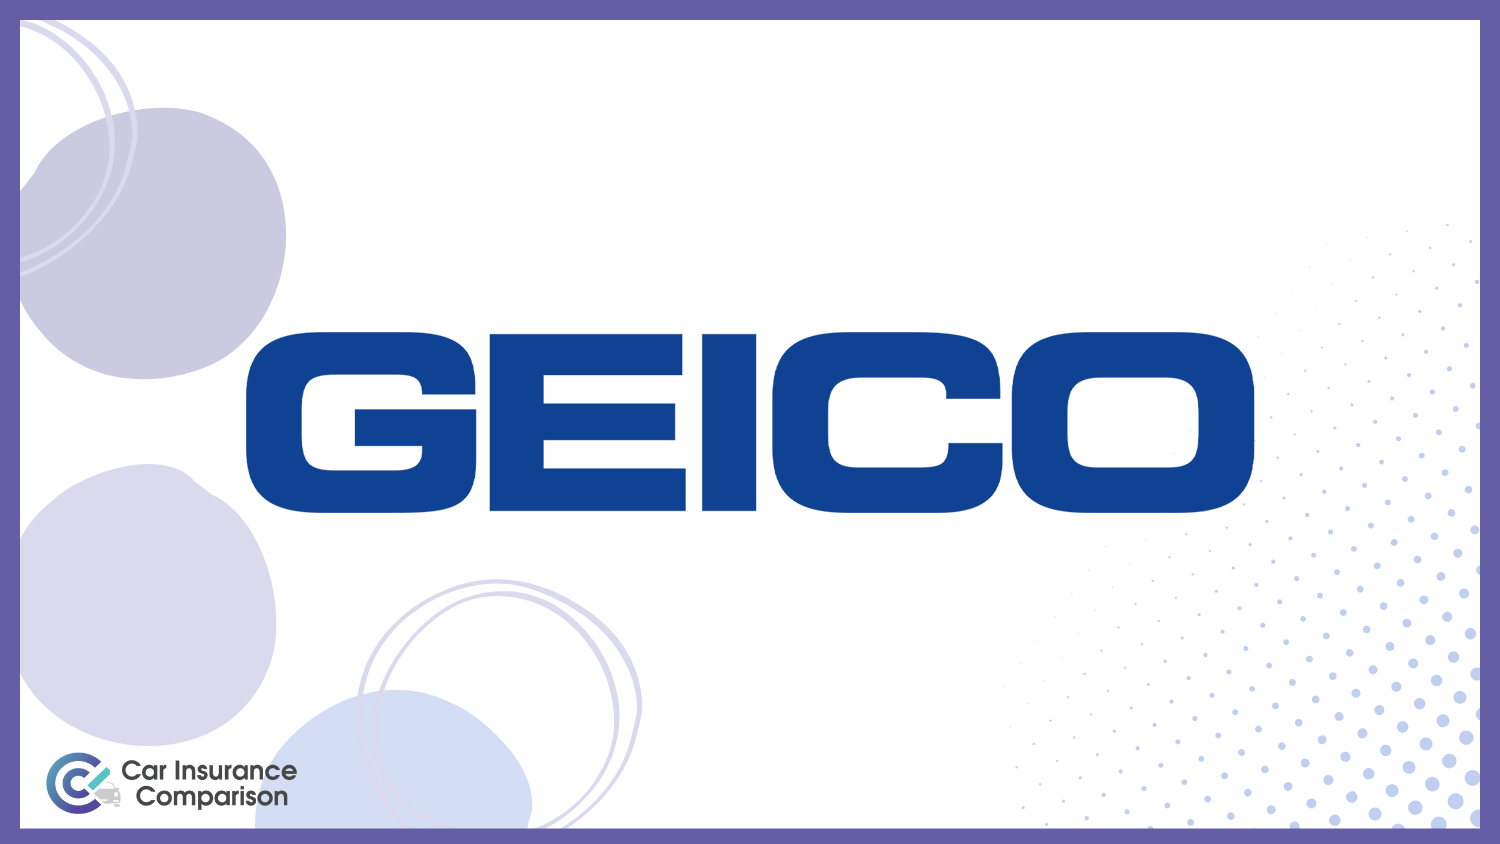 Geico: Best Insurance for Luxury Cars